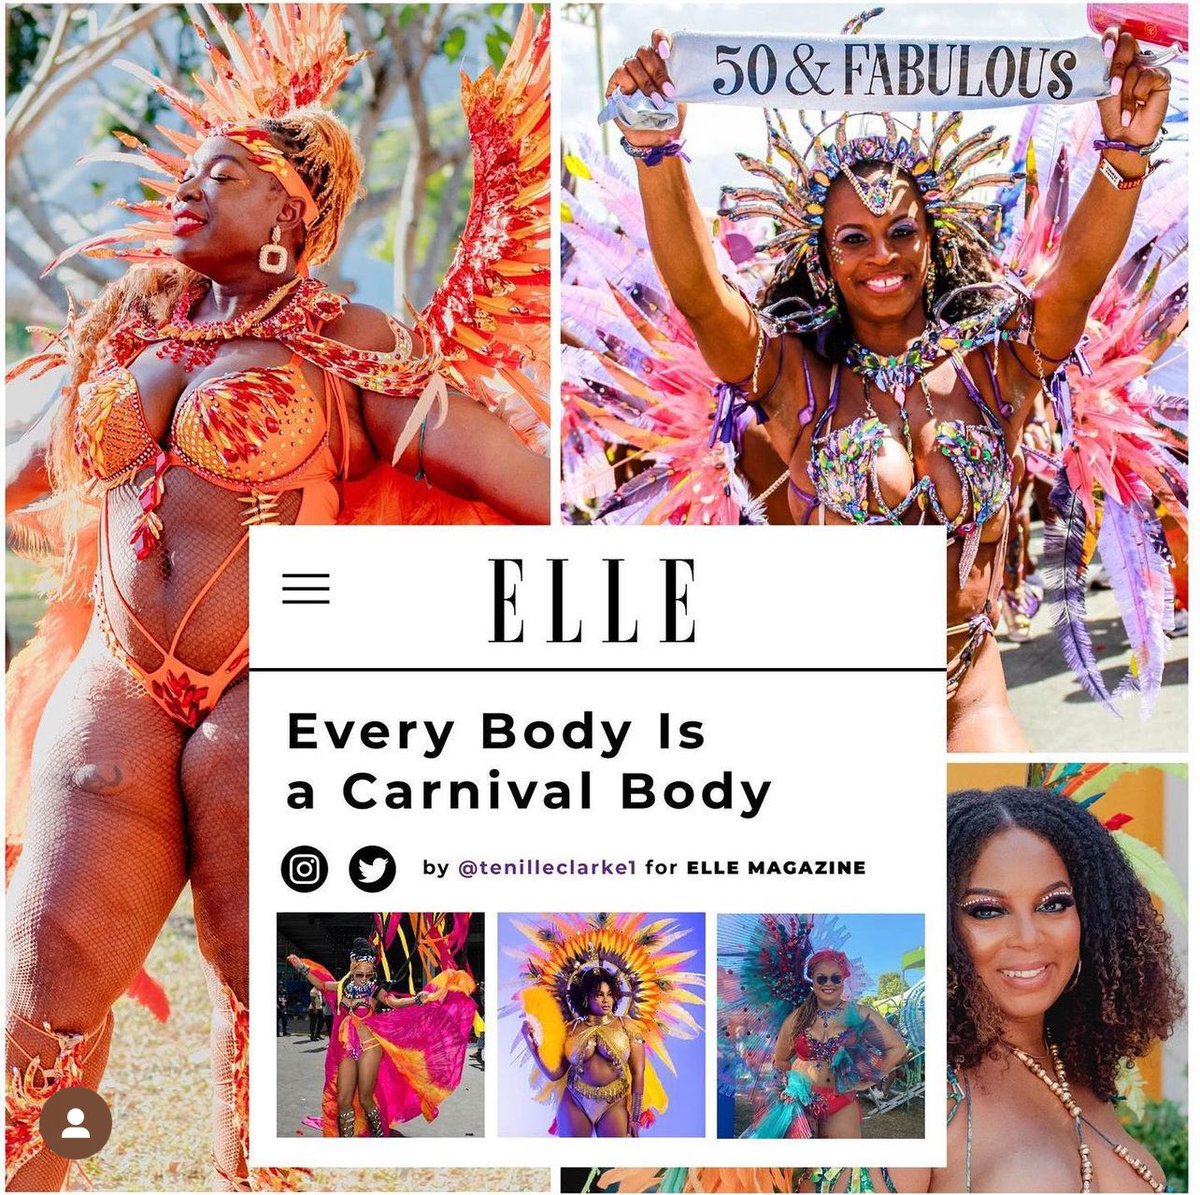 Exactly one year ago this month, I wrote “Every Body Is A Carnival Body” for @ELLEmagazine. It went on to be one of the most read stories for the magazine in 2023, amassing MILLIONS of views globally. I’m posting this today because as a Caribbean community, it’s important to